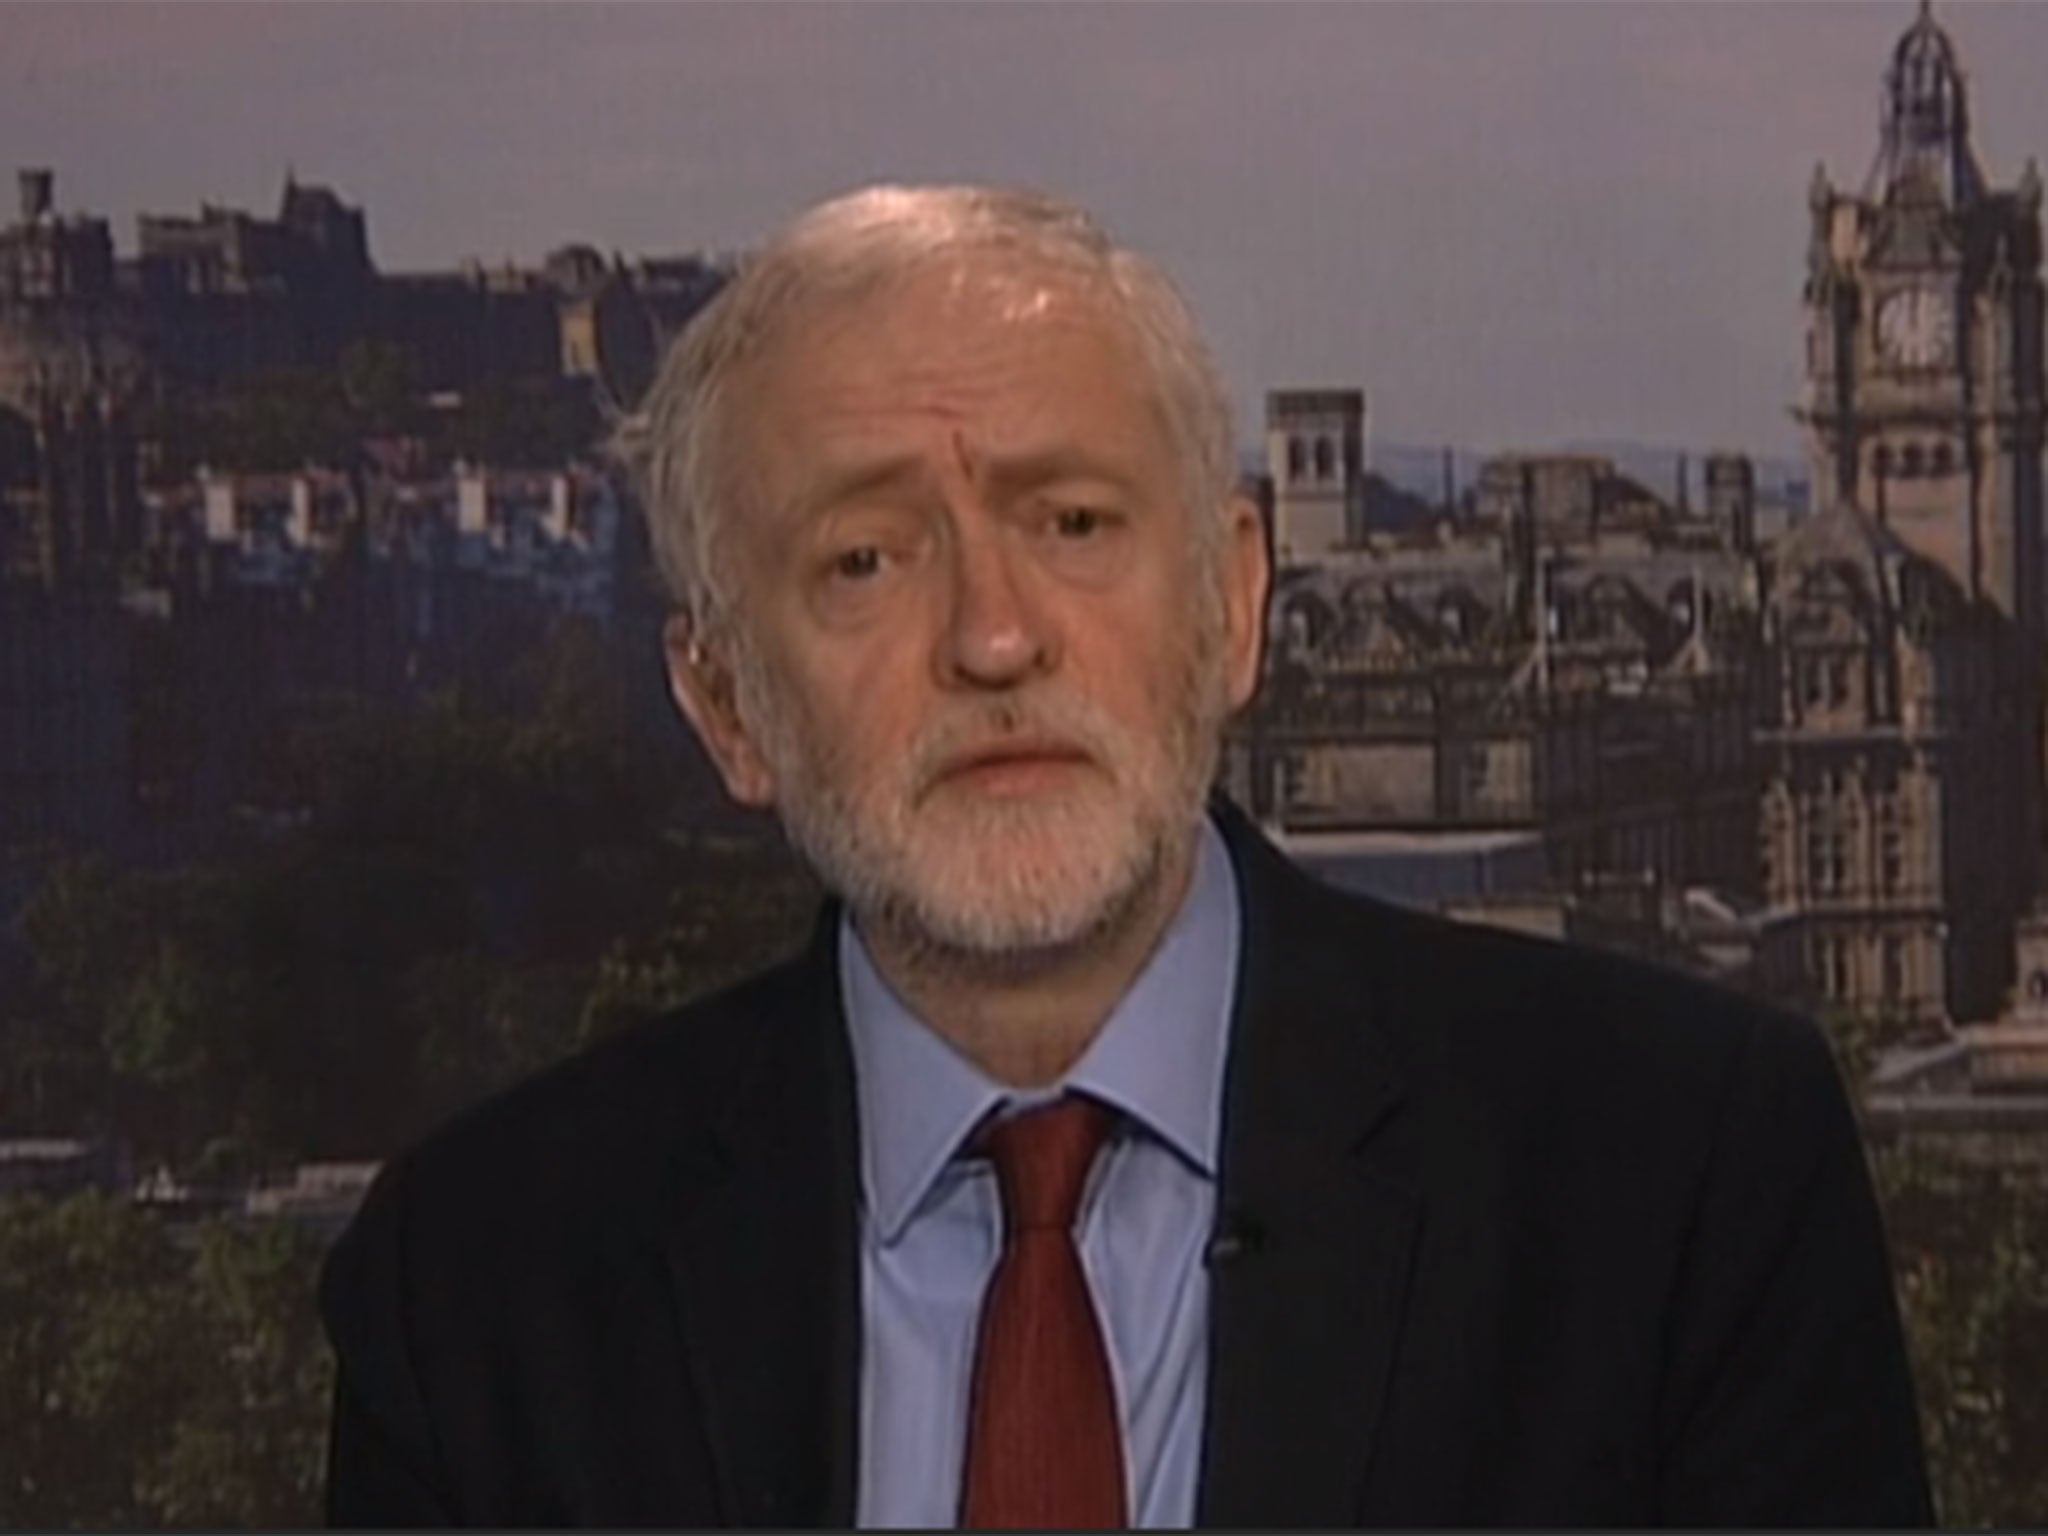 Jeremy Corbyn appeared on the Andrew Marr Show to defend the party's record on anti-semitism